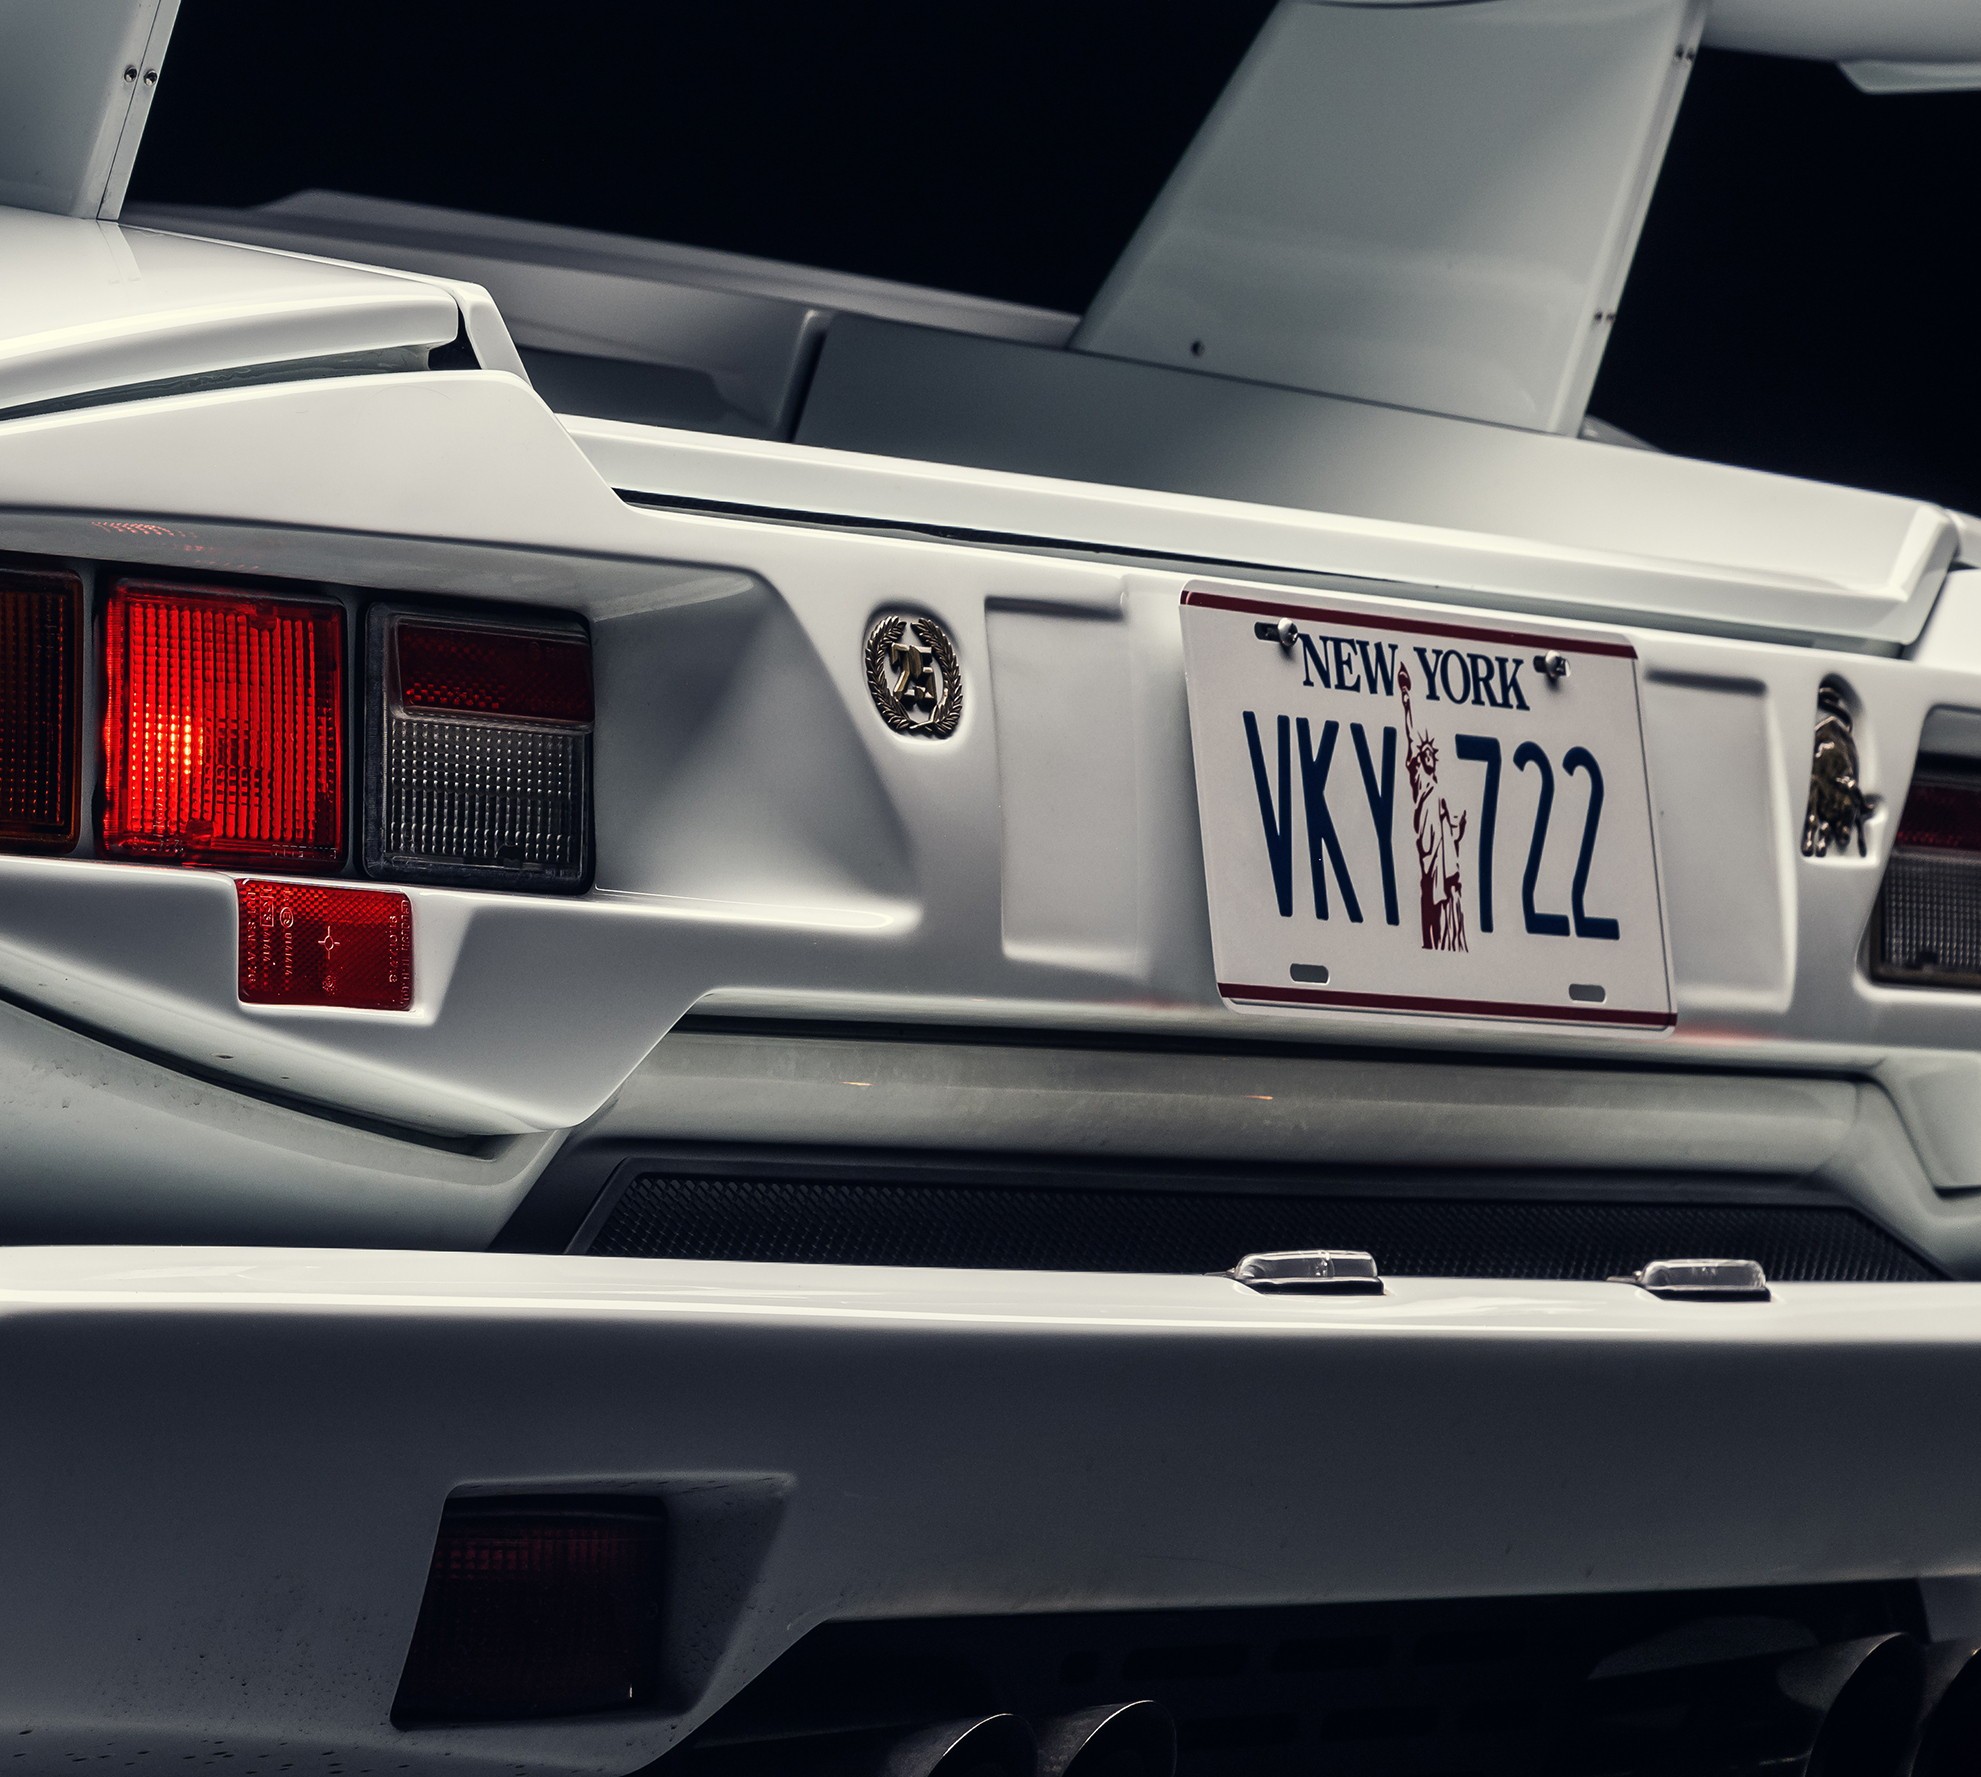 The Real Wrecked Lamborghini Countach From Wolf of Wall Street Is For Sale